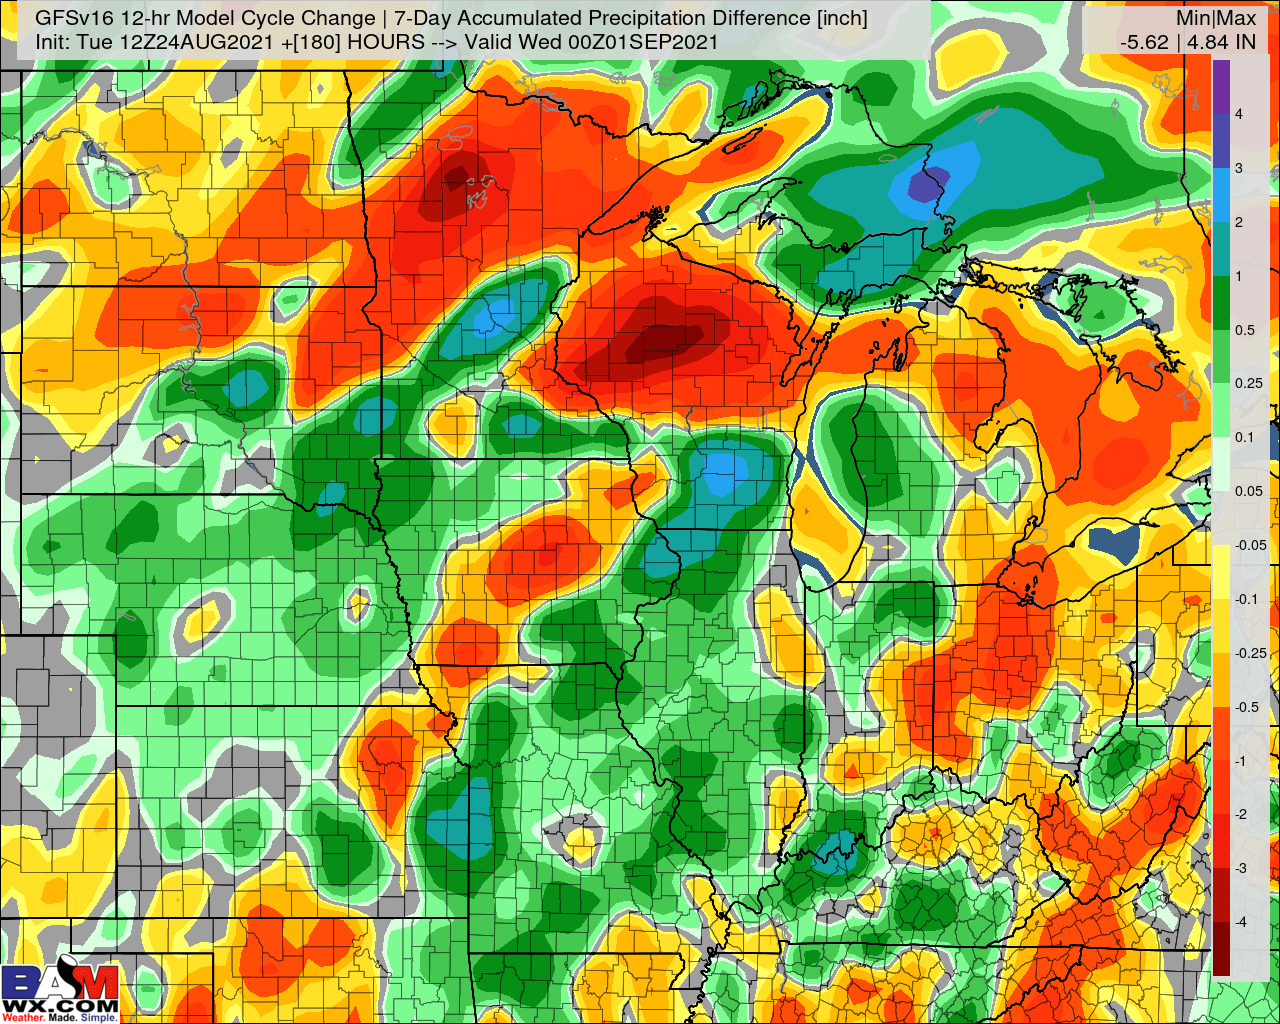 8-24-21 PM GFS Ag Weather Report: Upper Midwest rains remained on-tap, remaining skeptical of east Ag Belt rains. K.